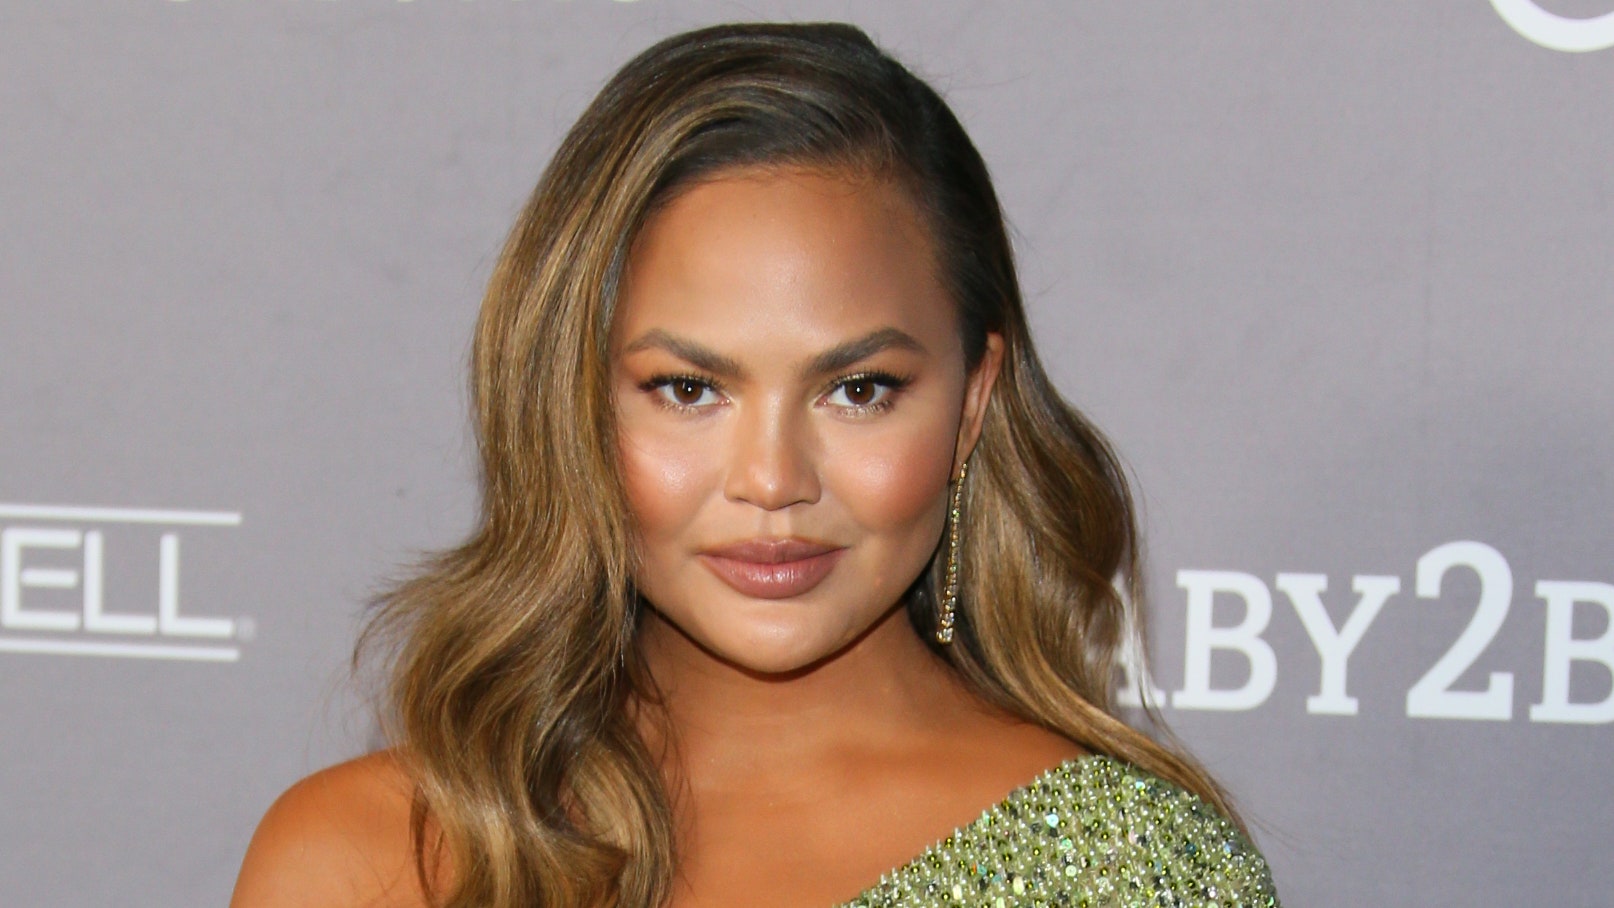 Chrissy Teigen Apologizes on Instagram For Past Mean Tweets